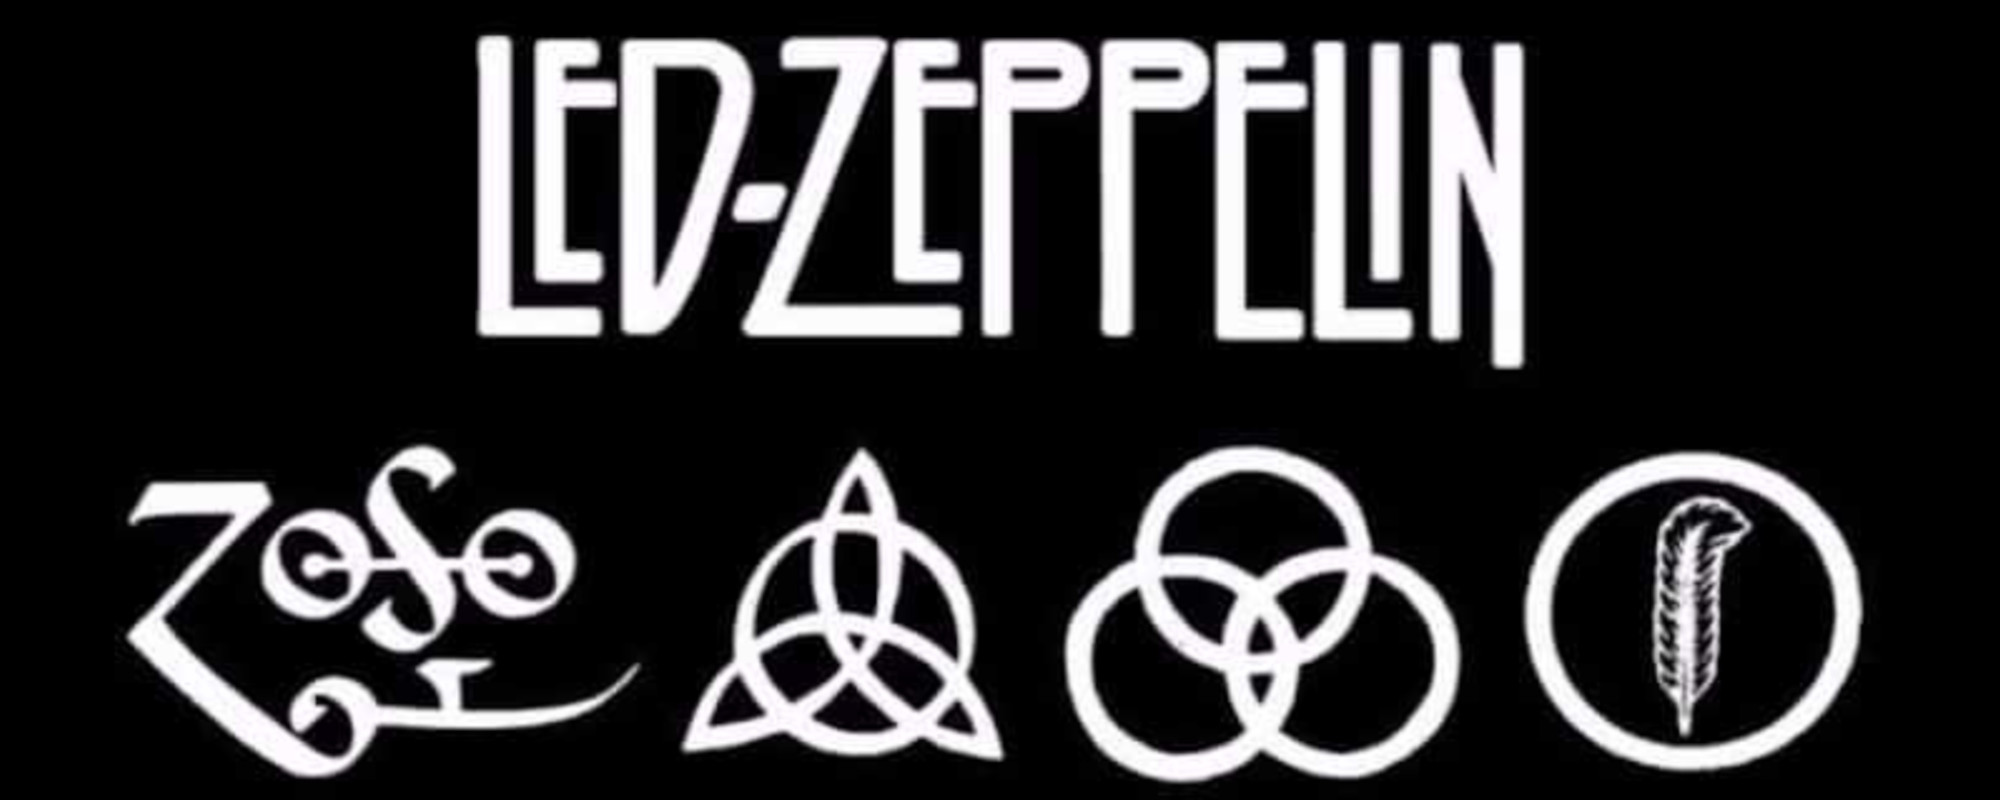 Four Led Zeppelin Symbols and Their Meaning - American Songwriter